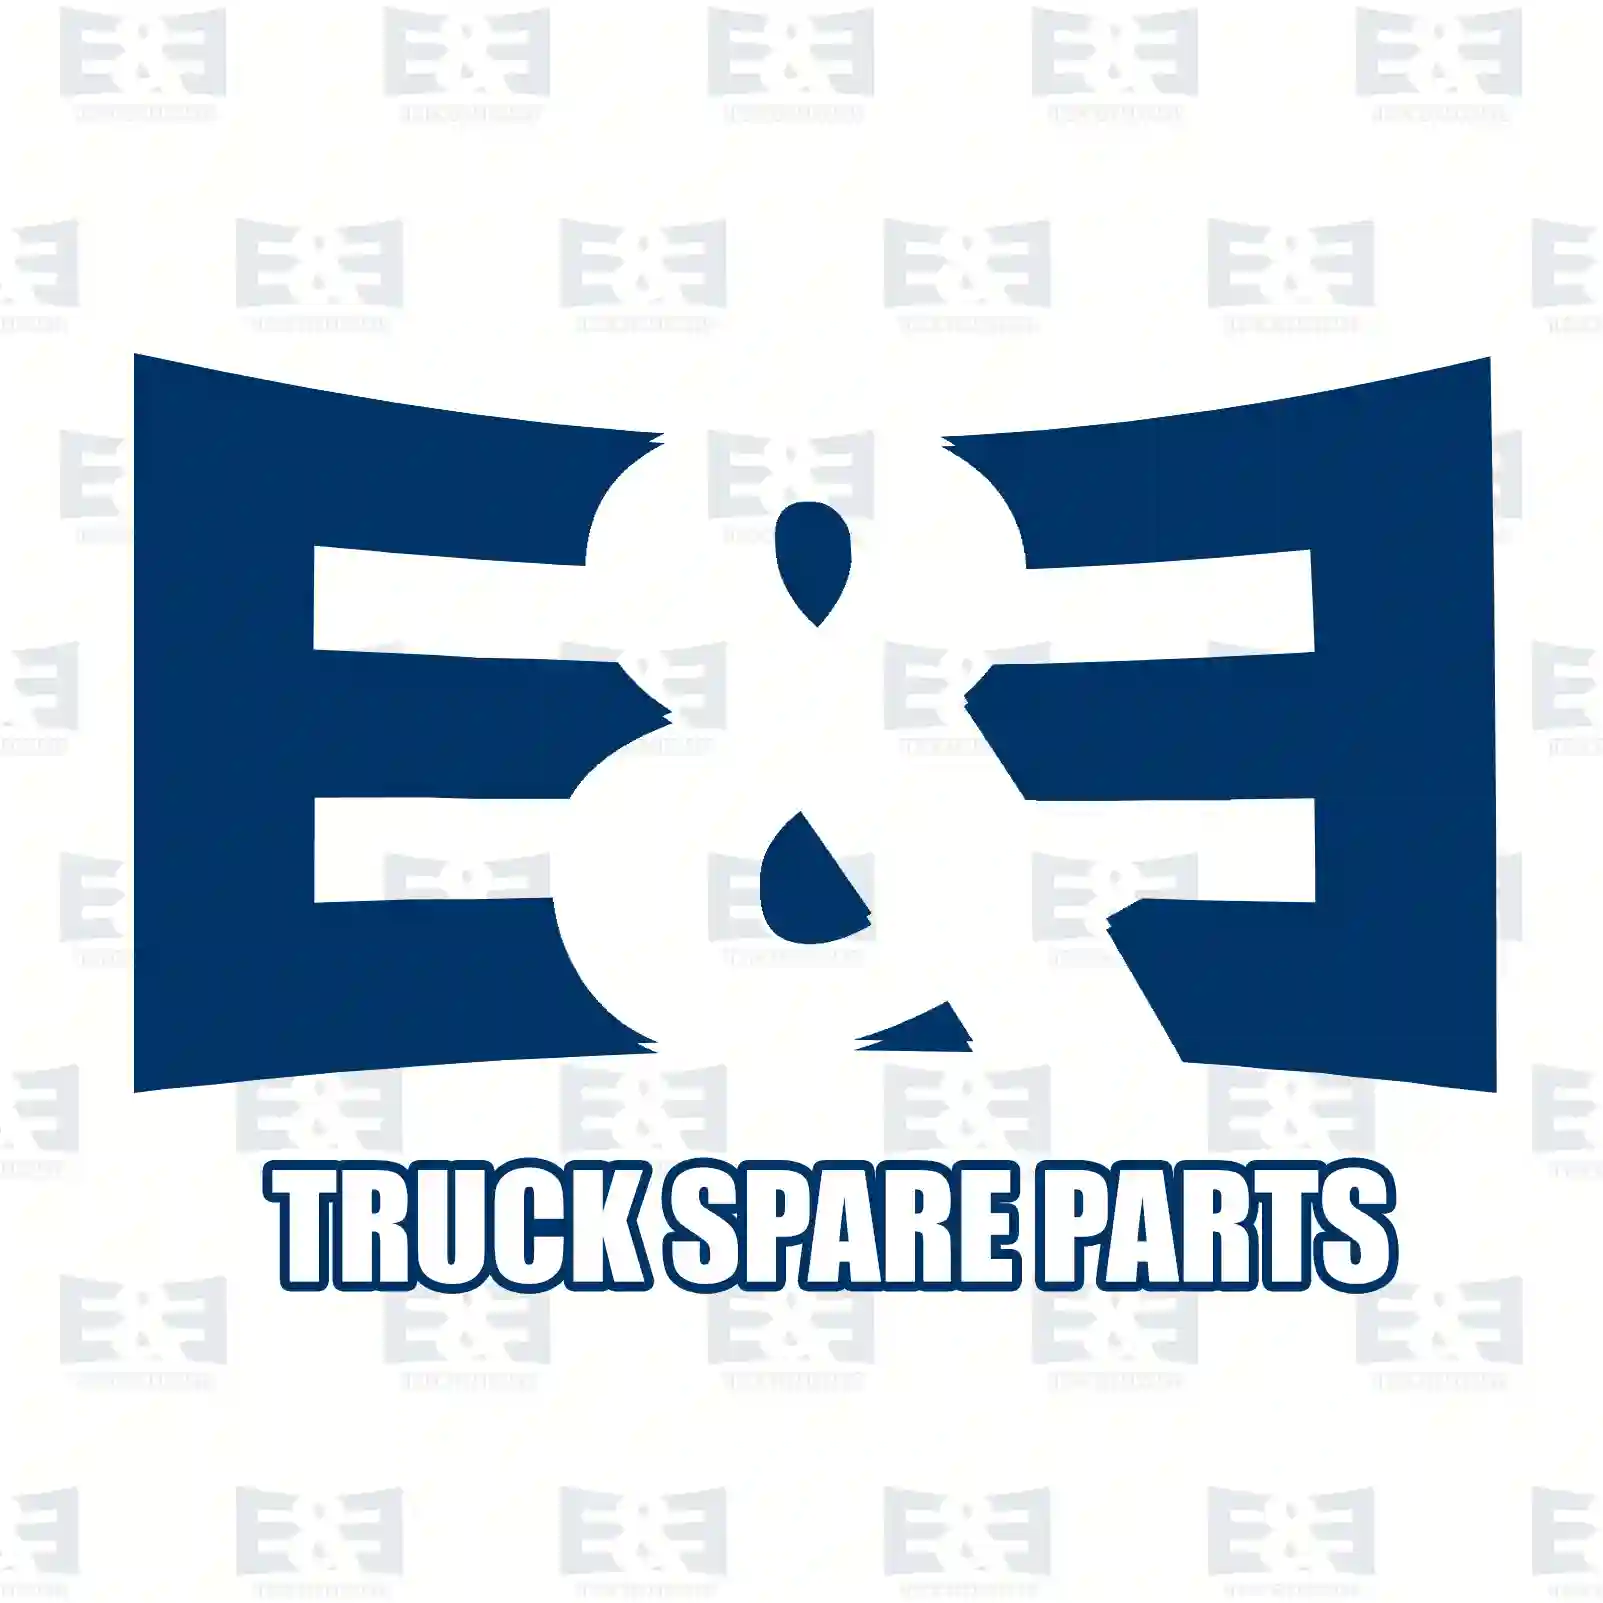  King pin kit, with bearing || E&E Truck Spare Parts | Truck Spare Parts, Auotomotive Spare Parts